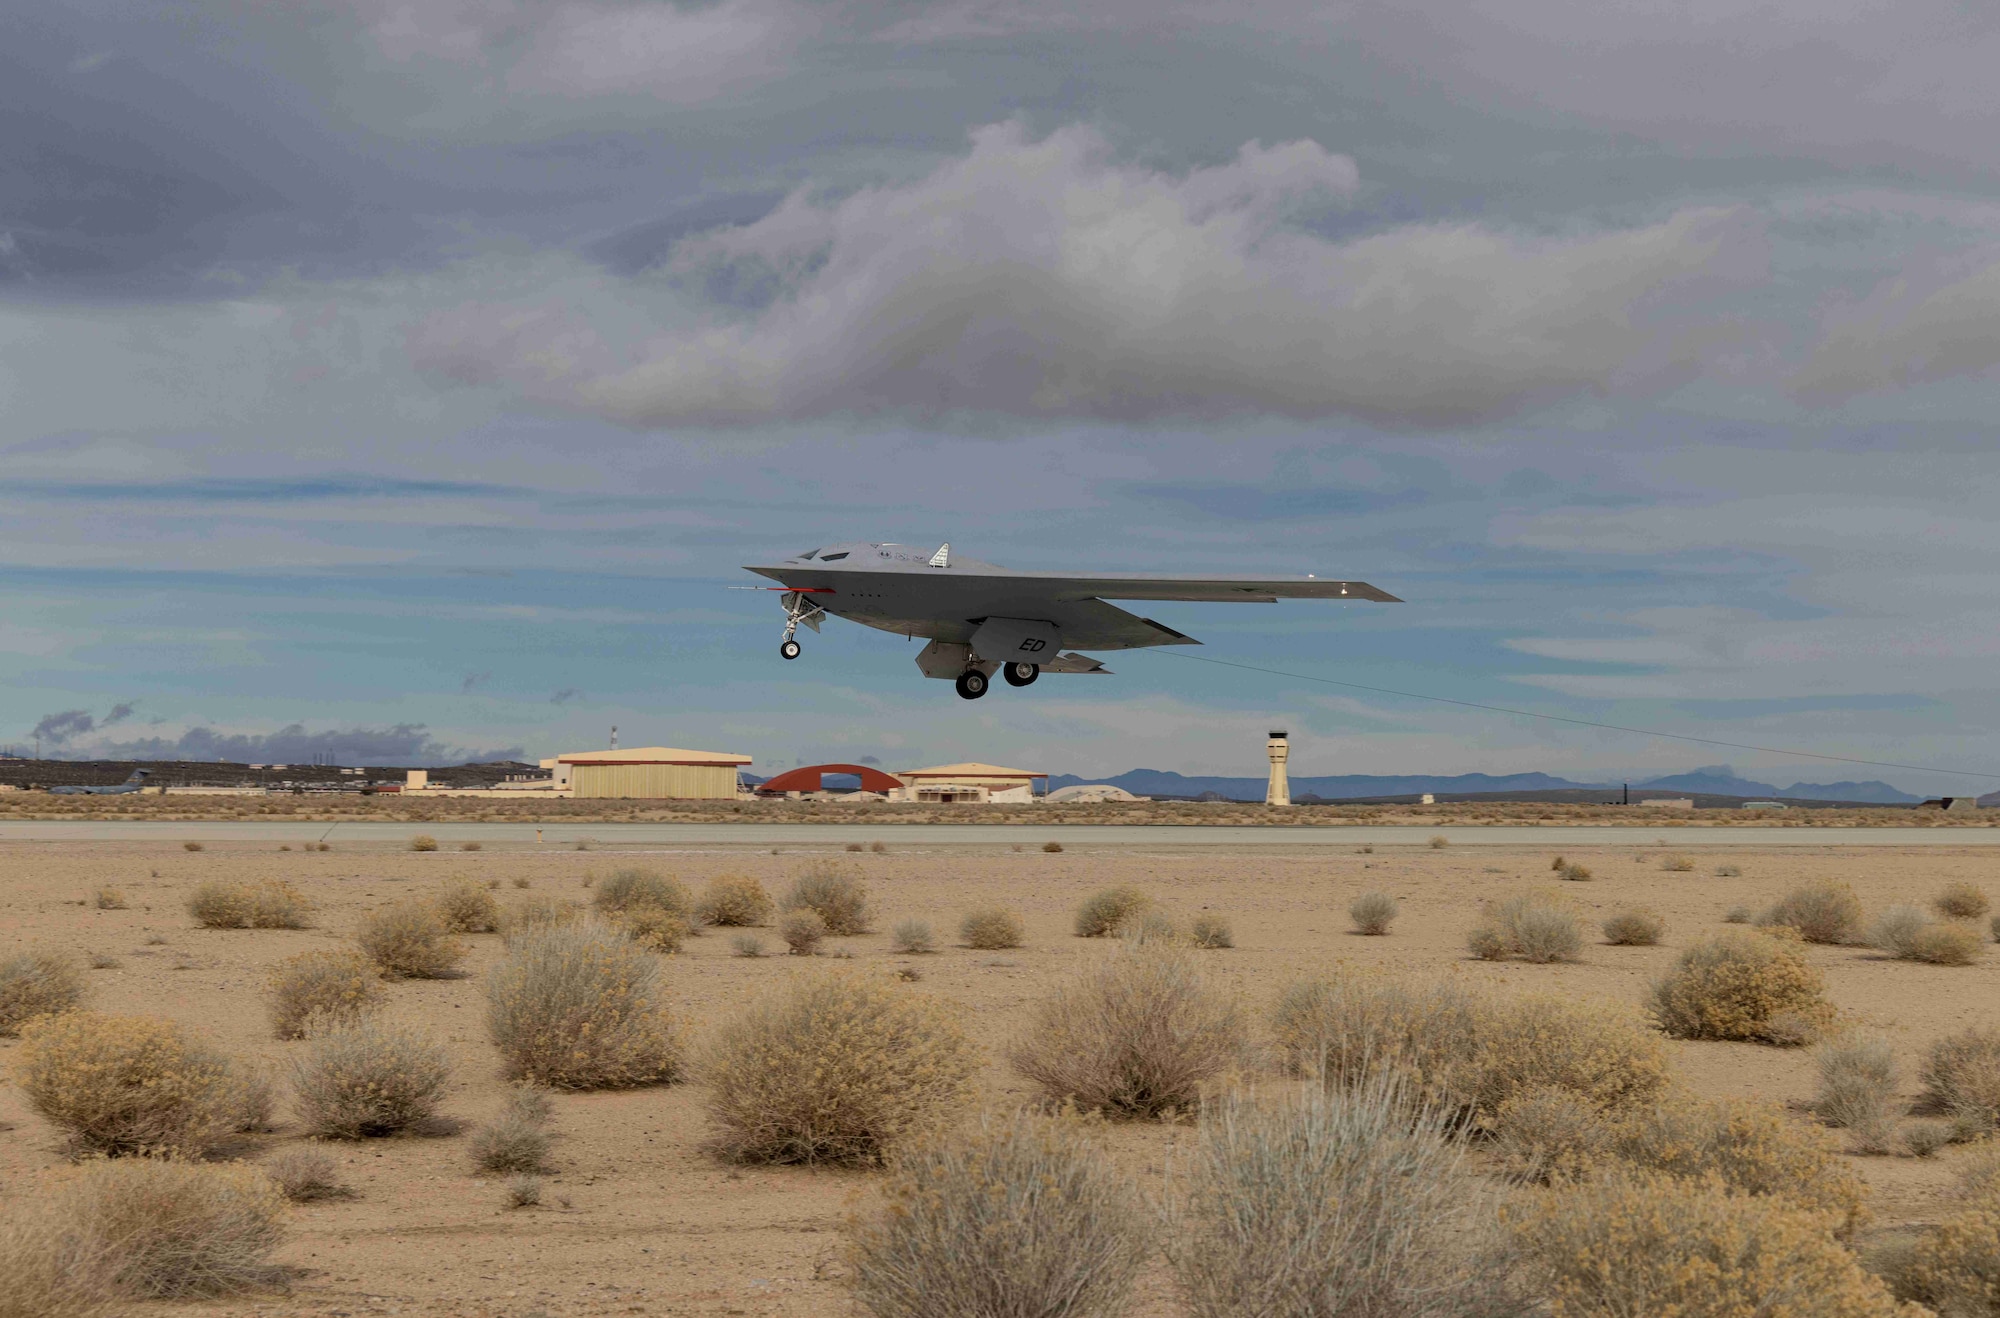 -A B-21 Raider conducts flight tests, which includes ground testing, taxiing, and flying operations, at Edwards Air Force Base, California, where it continues to make progress toward becoming the backbone of the U.S. Air Force bomber fleet. The B-21 will possess the range, access, and payload to penetrate the most highly-contested threat environments and hold any target around the globe at risk. The B-21 program is on track to deliver aircraft in the mid-2020s to Ellsworth Air Force Base, South Dakota, which will be the first B-21 main operating base and location for the B-21 formal training unit. (Courtesy photo)